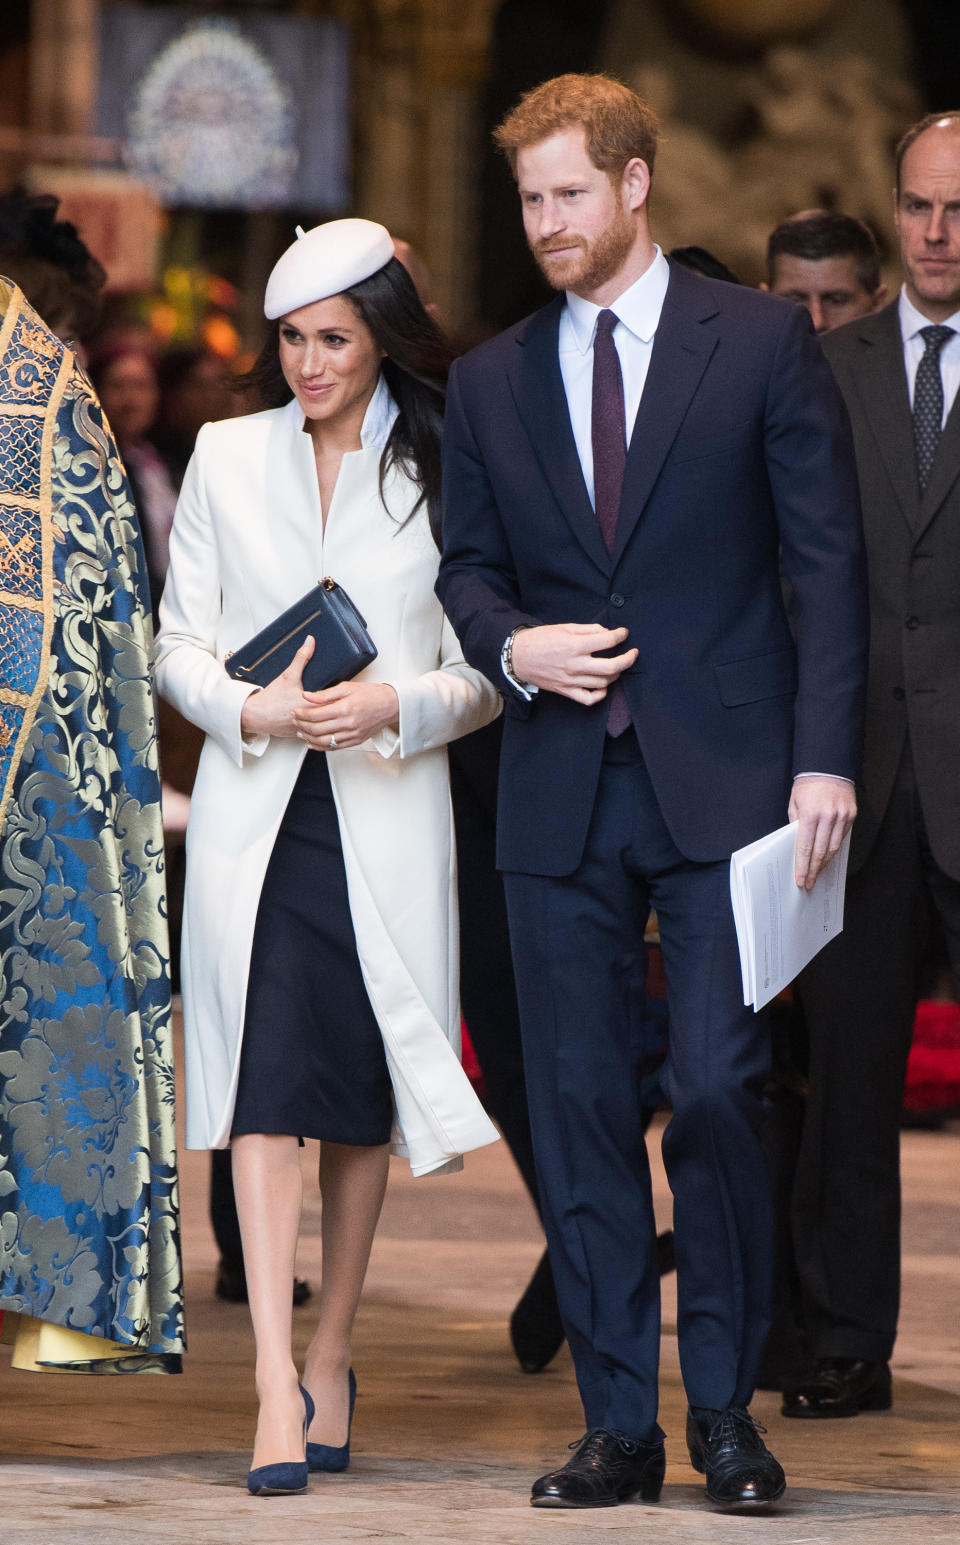 Prince Harry wore a navy suit for the occasion, as did Prince William. (Photo: Samir Hussein via Getty Images)